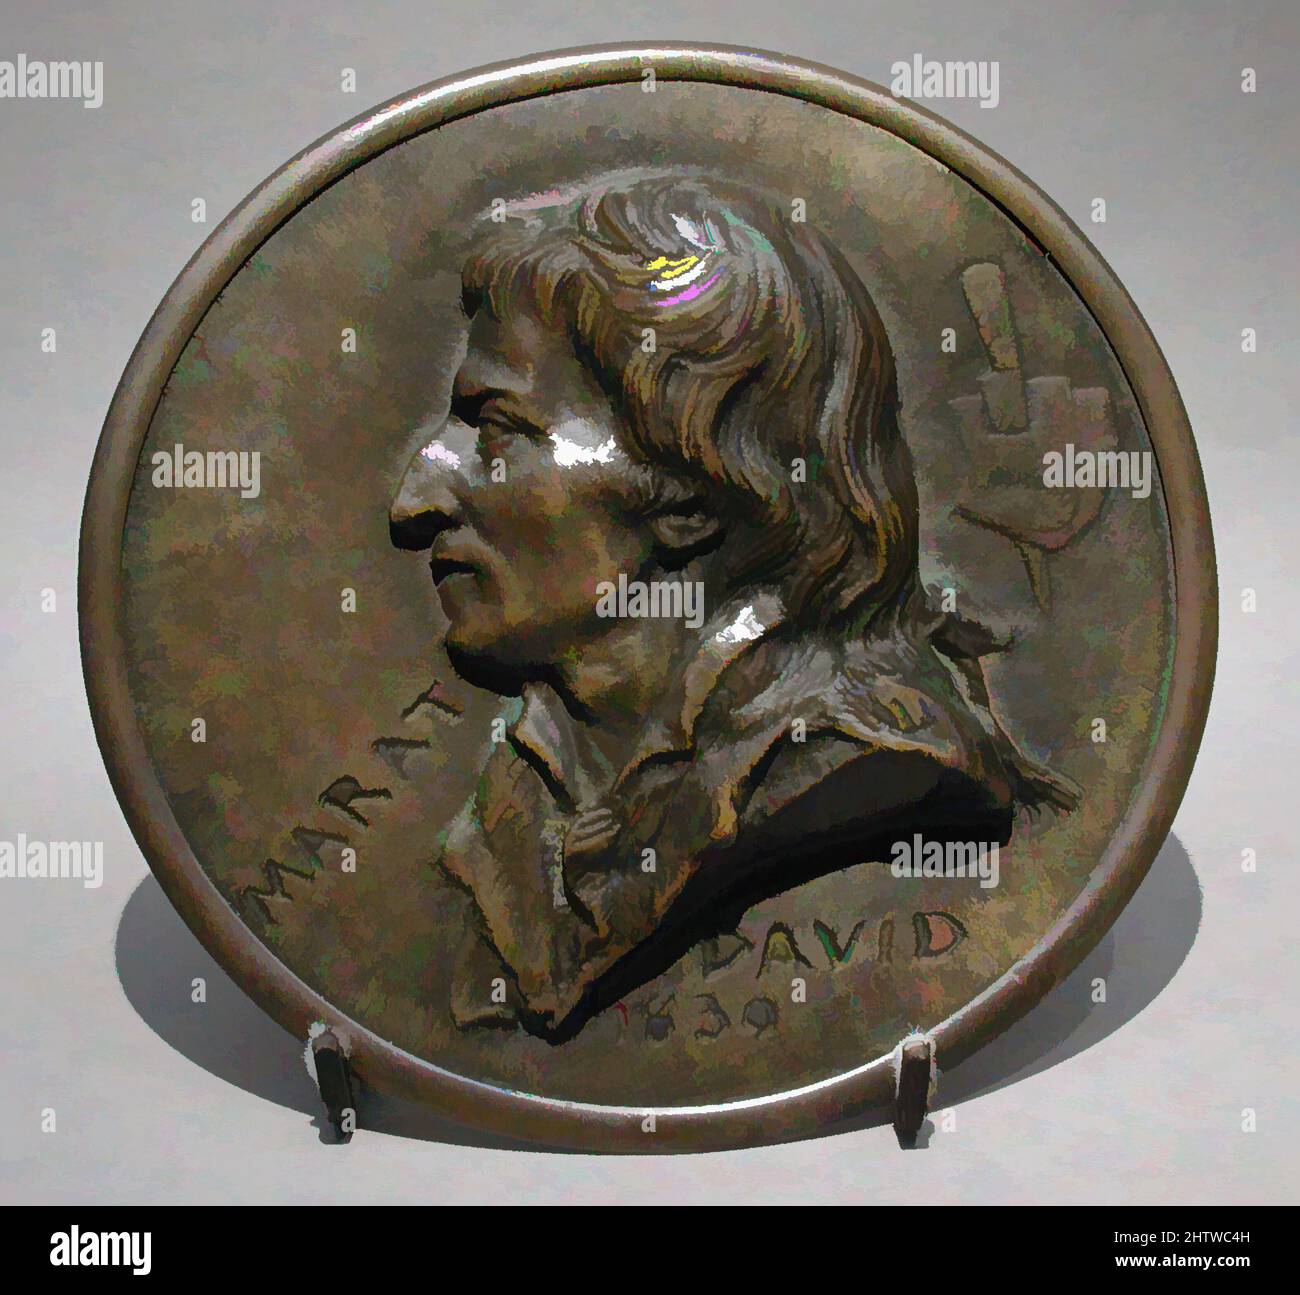 Art inspired by Marat, mid-19th century after a model of 1830, French, Bronze, Diameter (confirmed): 5 in. (12.7 cm), Medals and Plaquettes, Pierre-Jean David d’Angers was the most prolific and one of the most important French sculptors of the first half of the nineteenth century, Classic works modernized by Artotop with a splash of modernity. Shapes, color and value, eye-catching visual impact on art. Emotions through freedom of artworks in a contemporary way. A timeless message pursuing a wildly creative new direction. Artists turning to the digital medium and creating the Artotop NFT Stock Photo